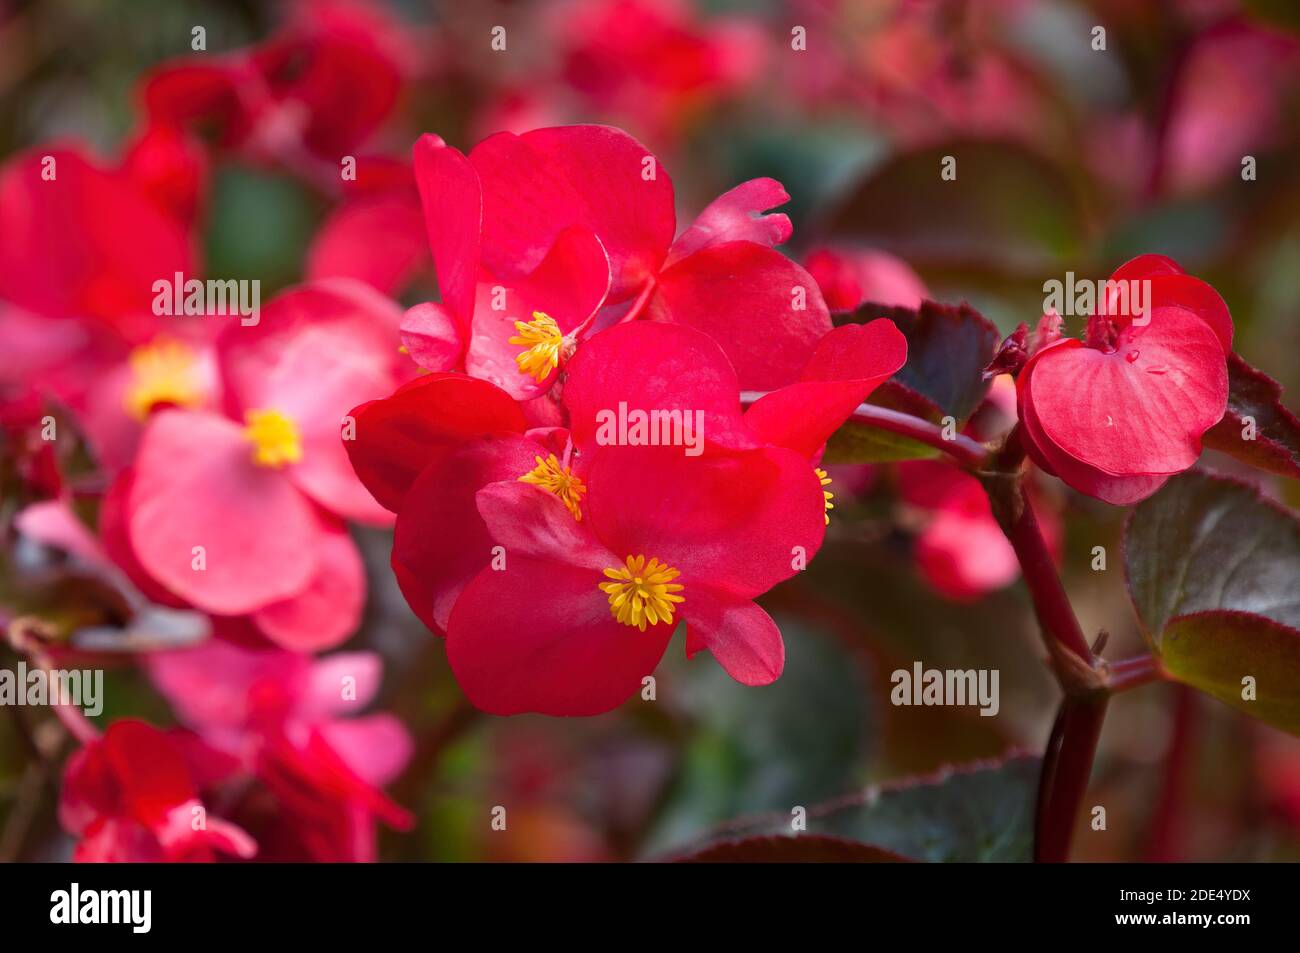 Sydney Australia, close-up of red waxy begonia flowers on a sunny day Stock Photo